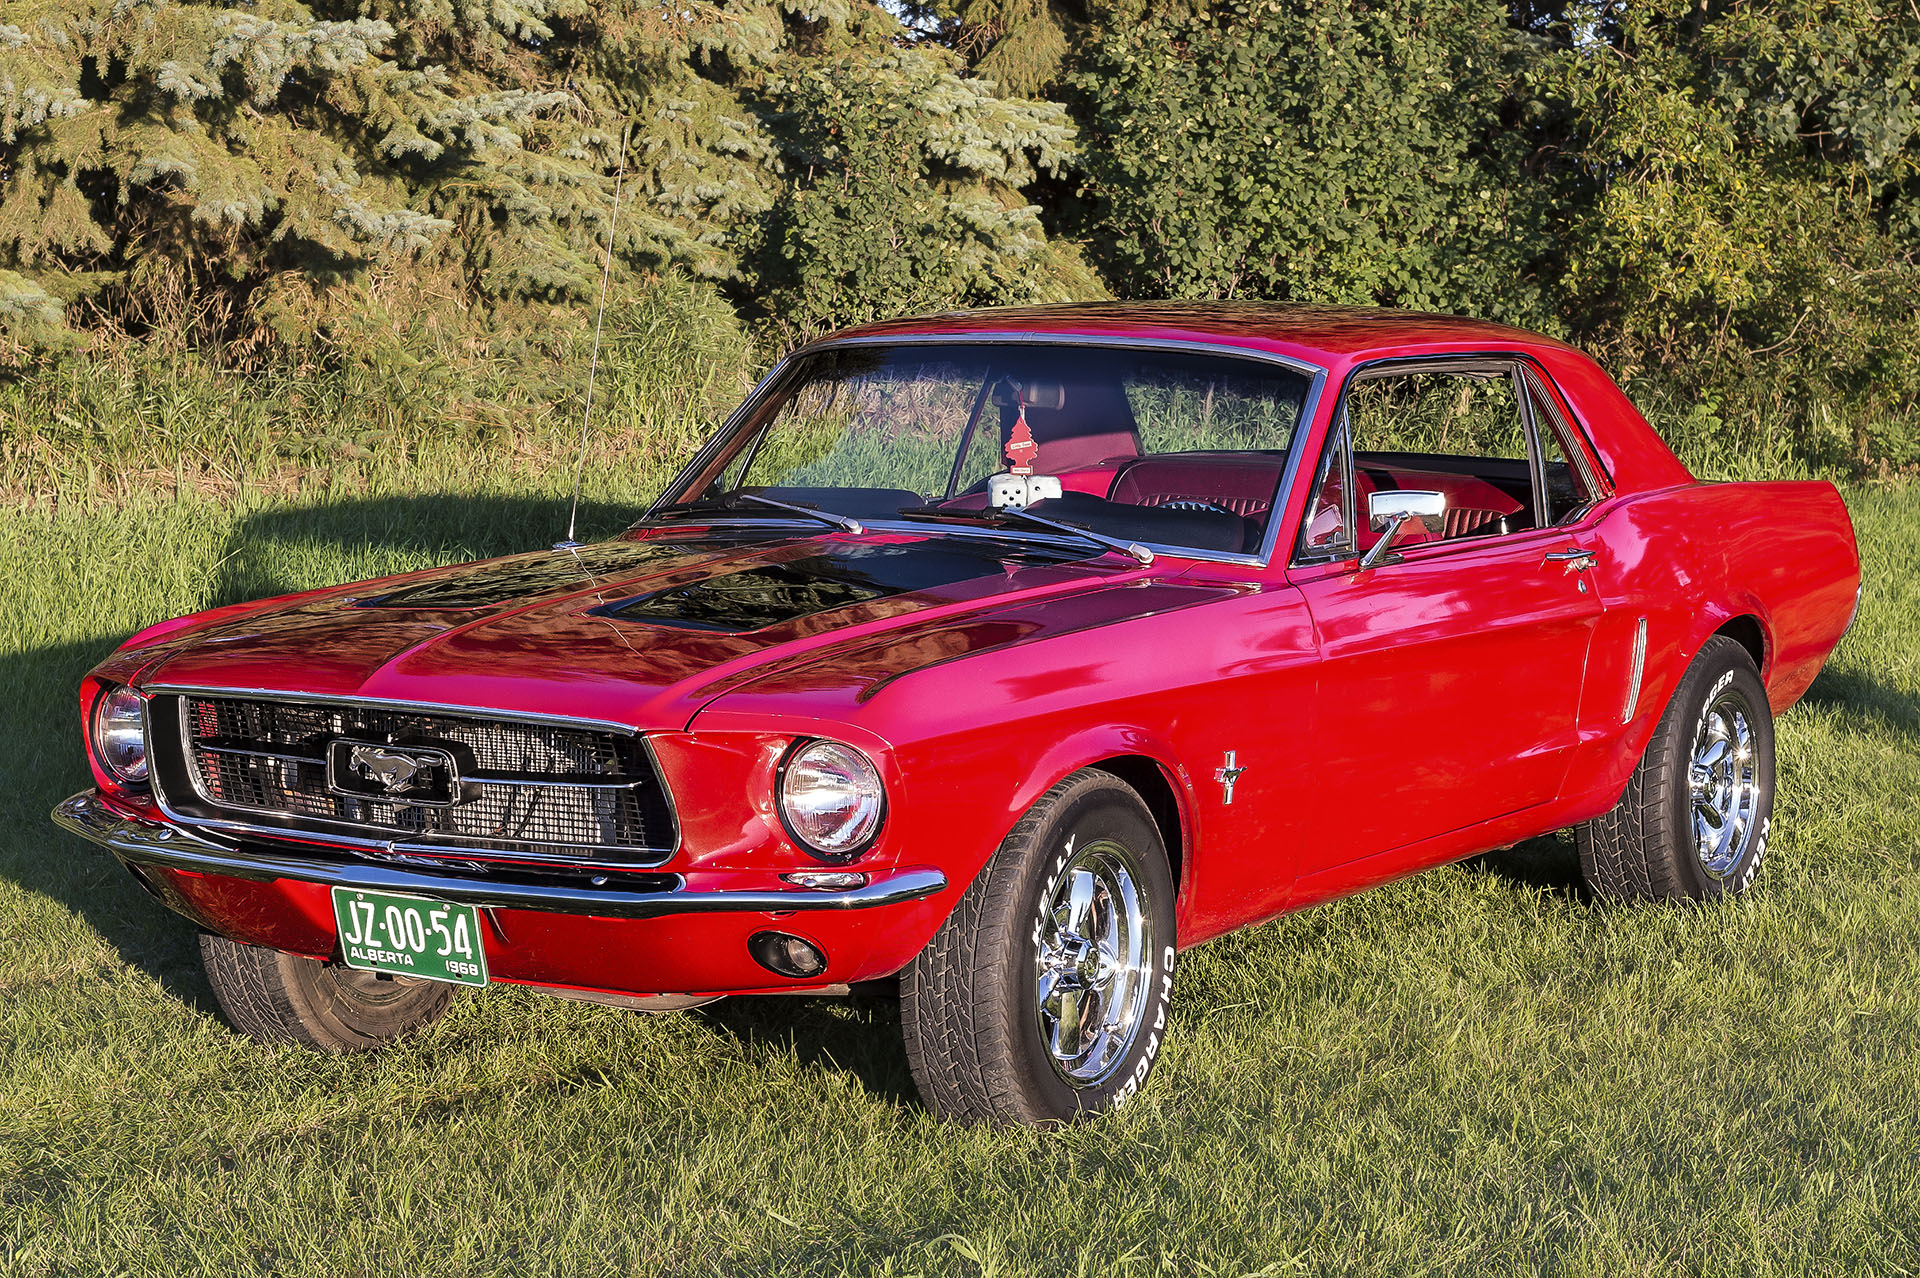   1968 Ford Mustang Coupe   Originally a 289 2-barrel car, recently upgraded to a 4-barrel high performance carb.&nbsp; Originally sold Winnipeg.&nbsp; This car is locally owned and you will see it at many Just Kruzin events throughout the year. 